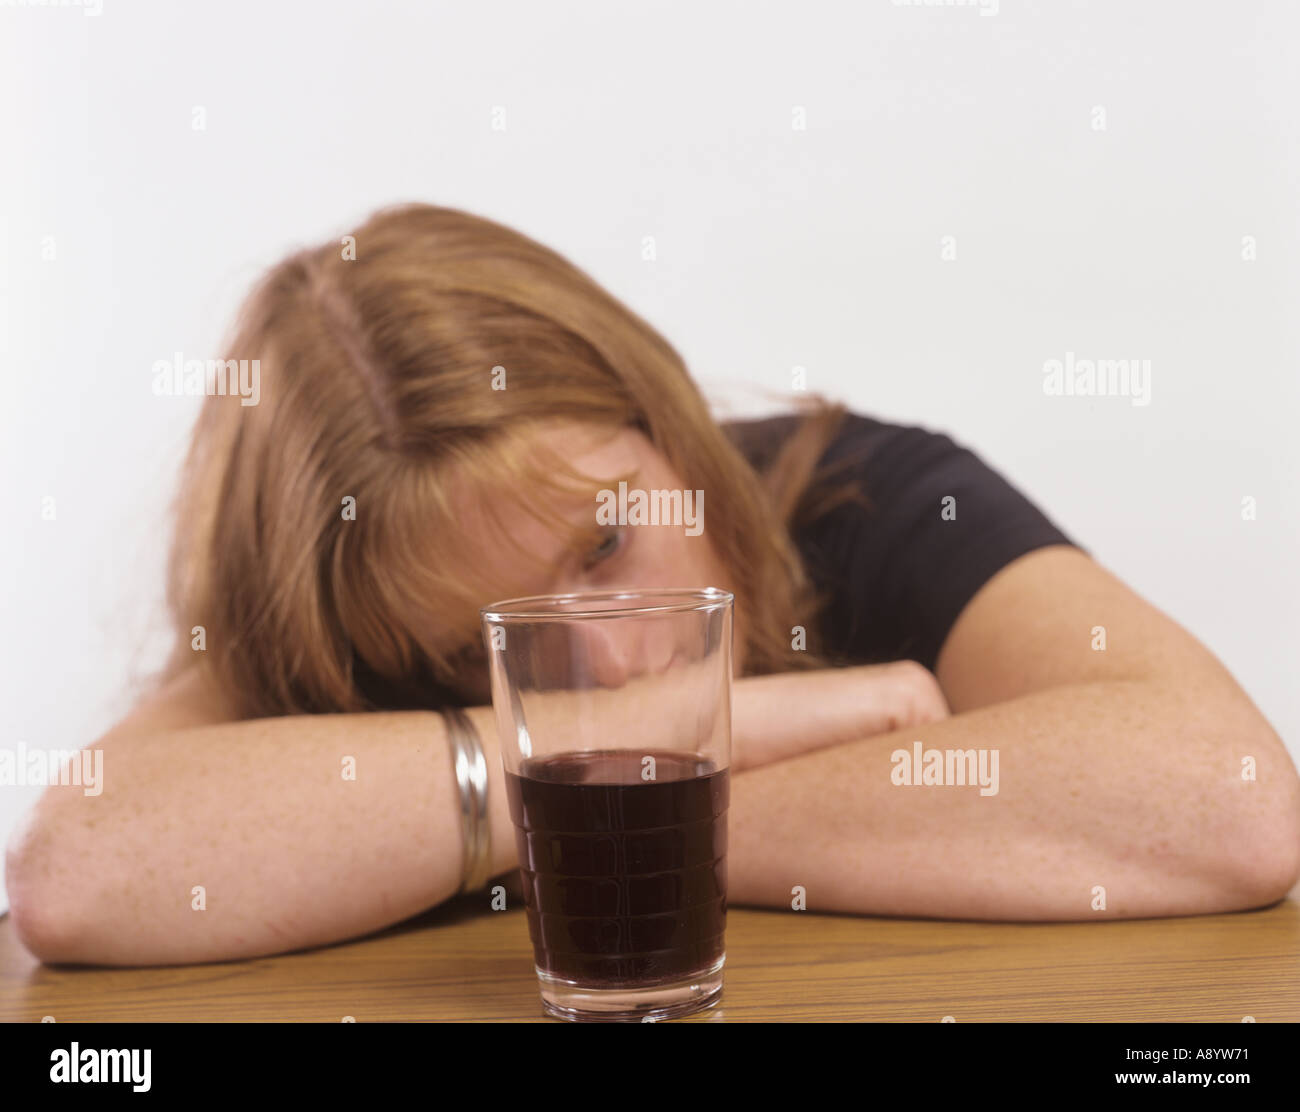 young woman taking alcohol modelled Stock Photo